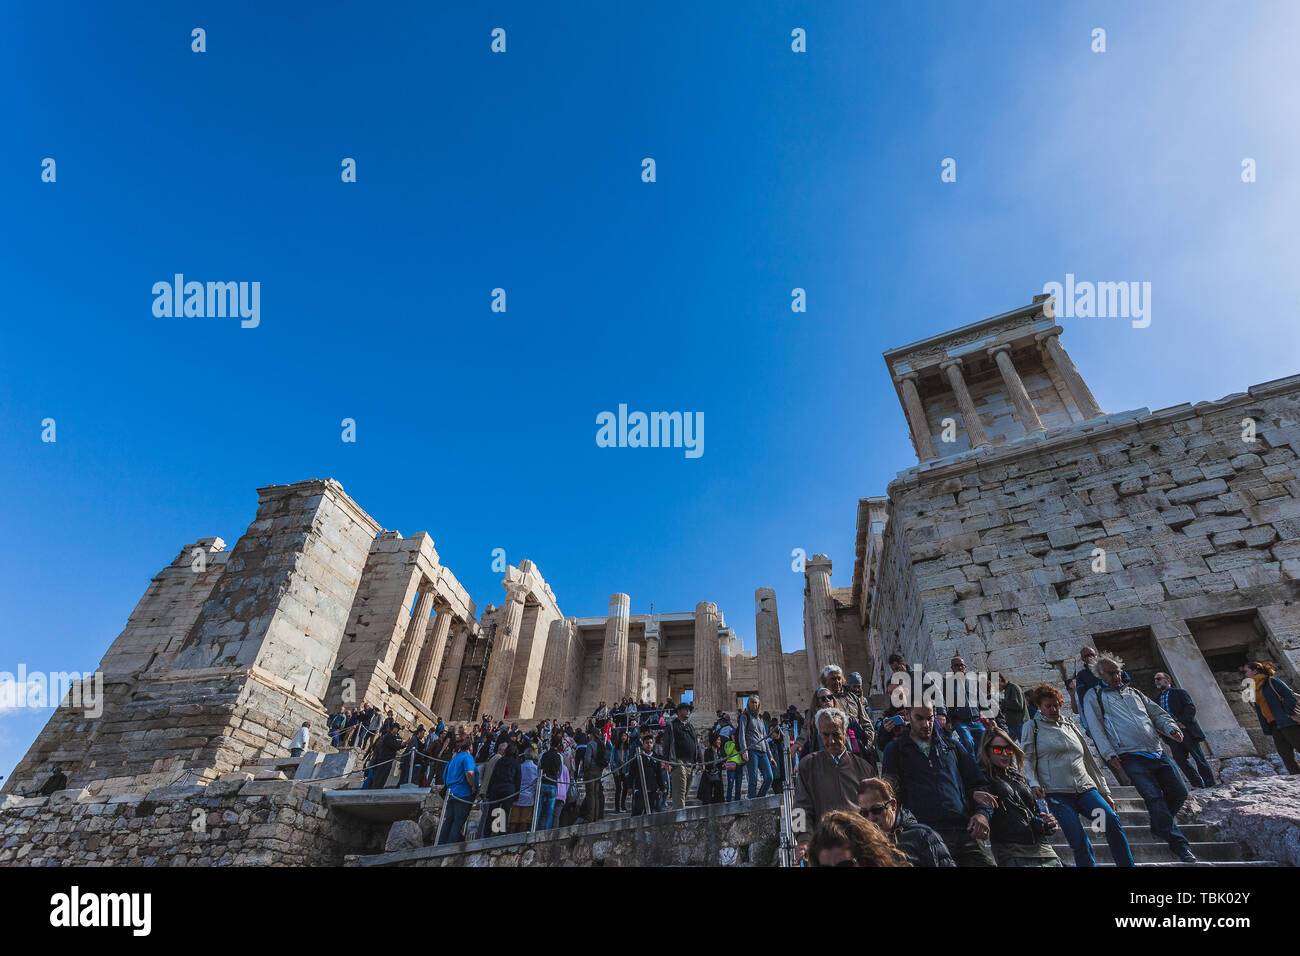 ATHENS GREECE - OCTOBER 25 2018: Tourists descending the staircase in front of the Acropolis Propylaea Stock Photo